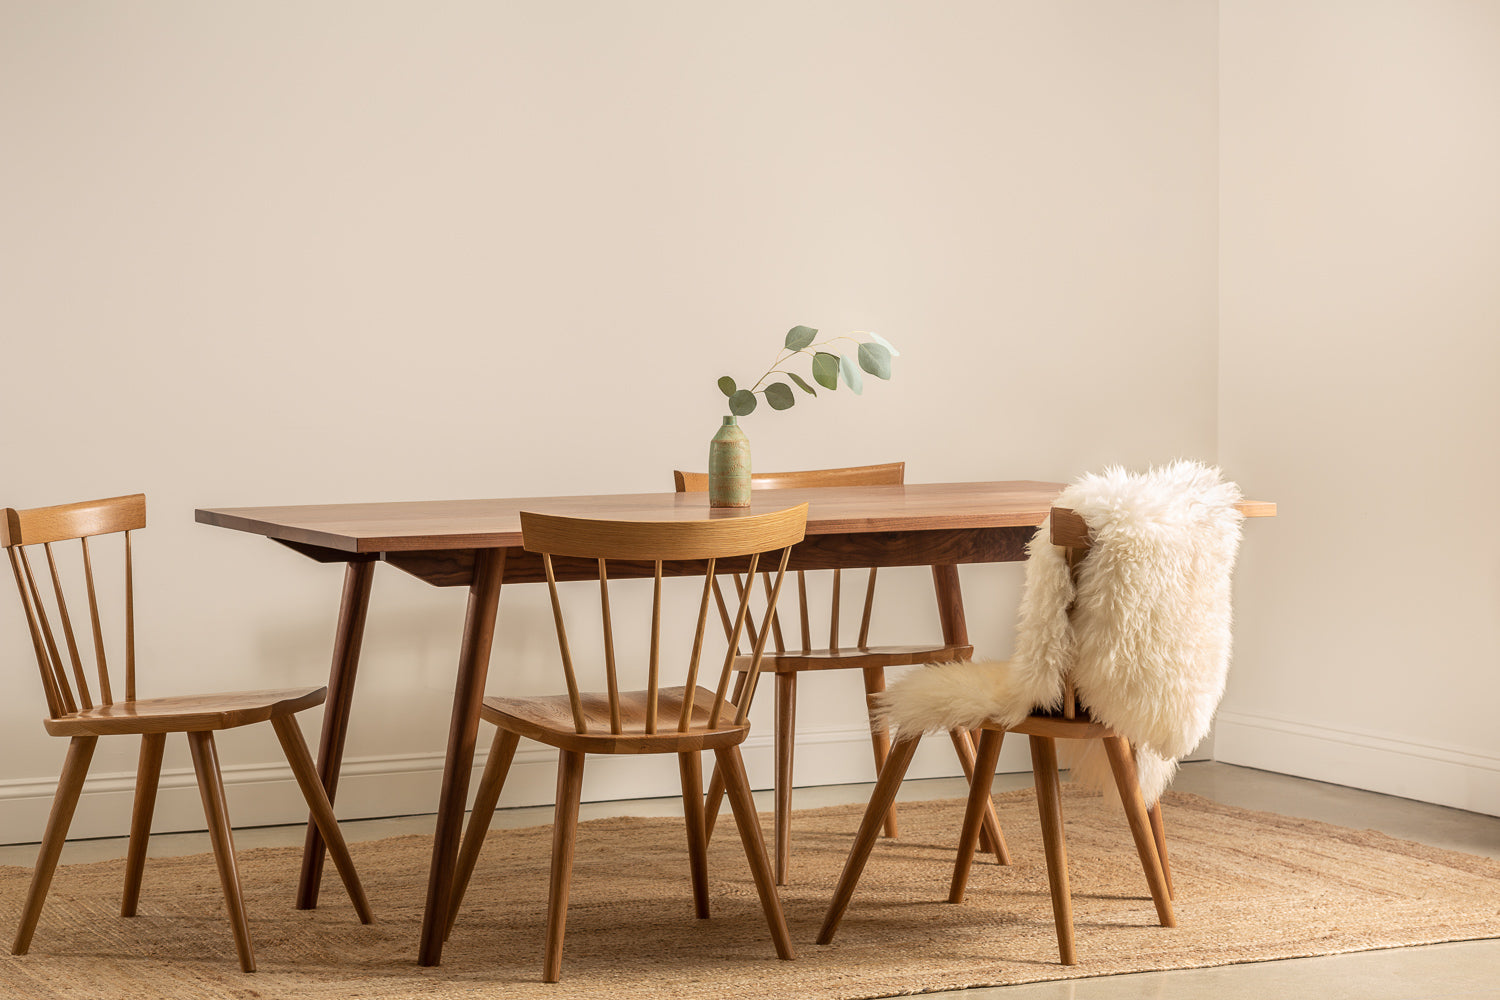 Four modern Windsor style chairs in white oak with Scandinavian inspired table and styling